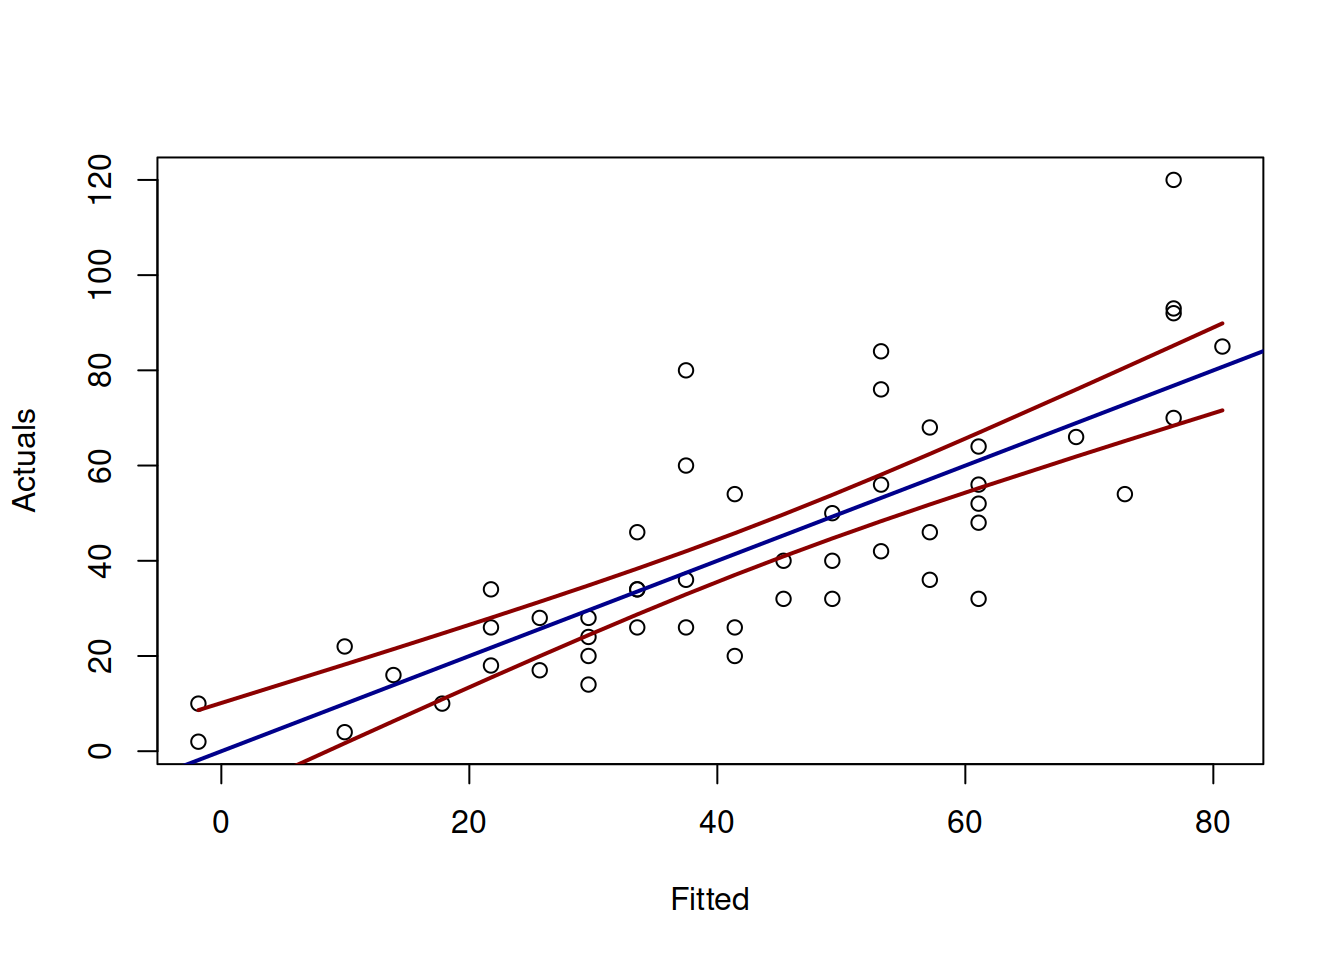 Actuals vs Fitted and confidence interval for the stopping distance model.